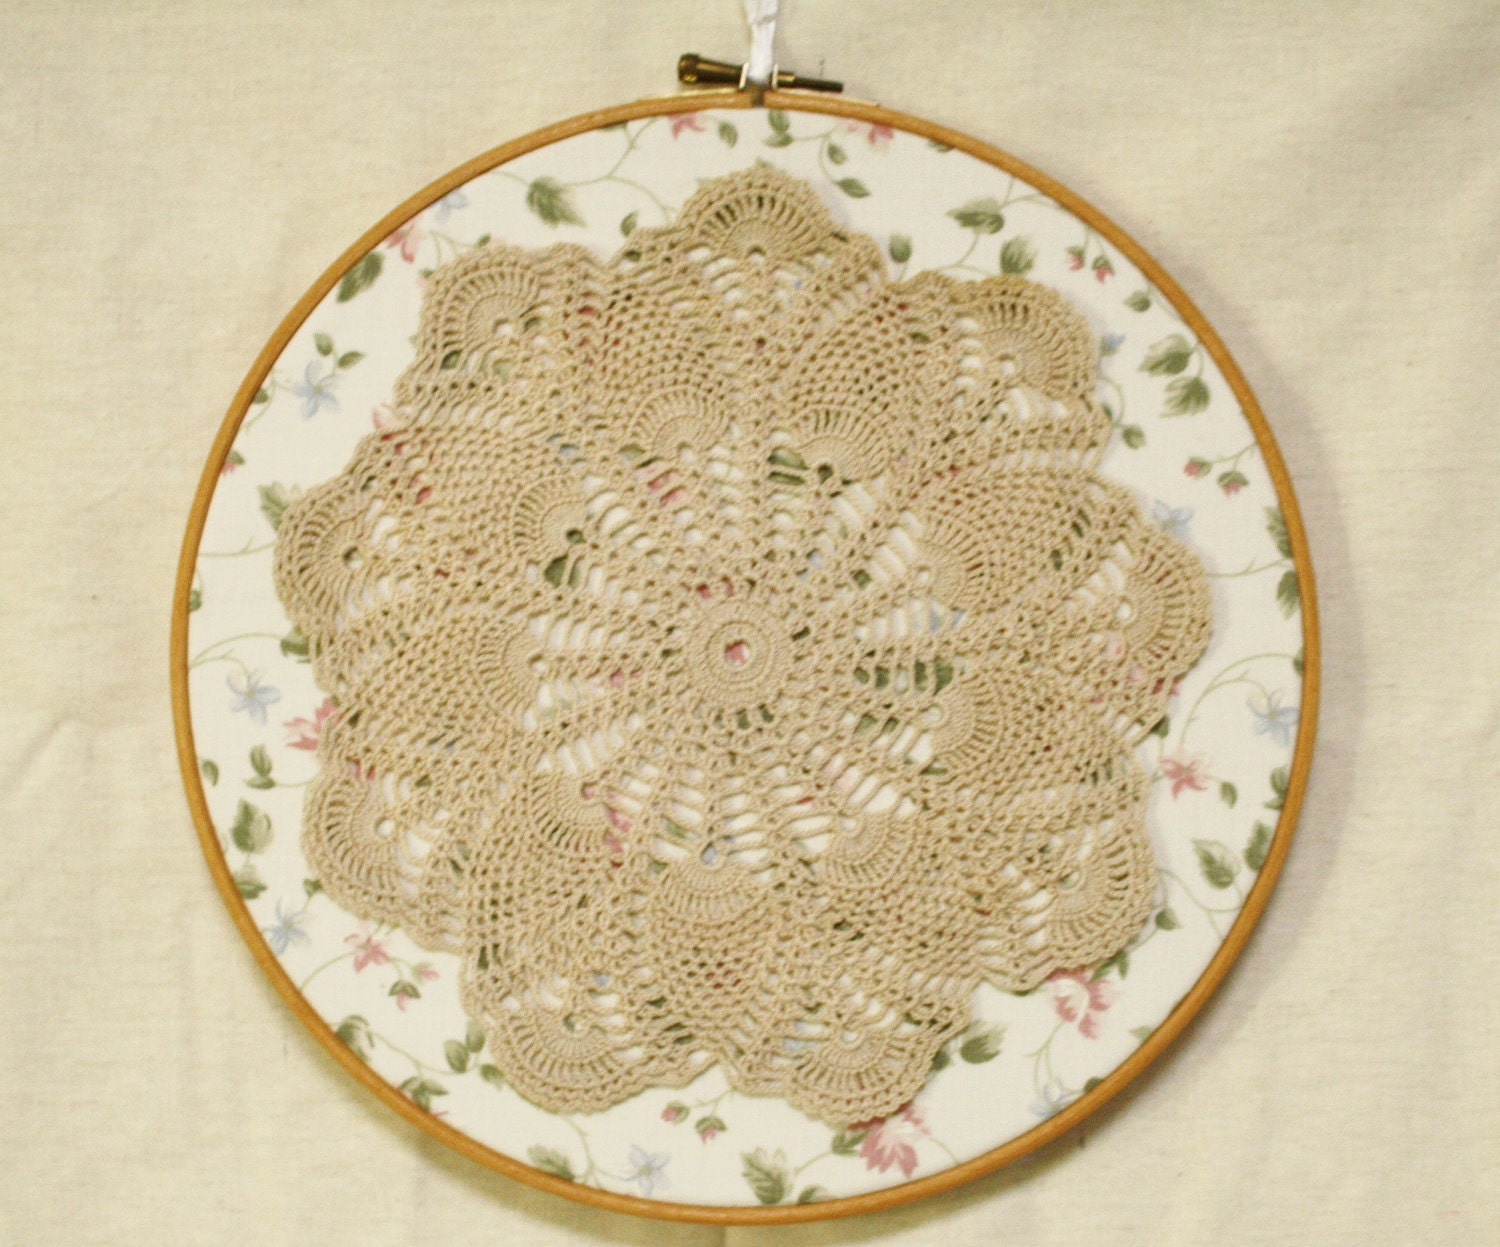 Floral and lace doily hoop art, home decor, wall hanging - lilchickenbigchicken